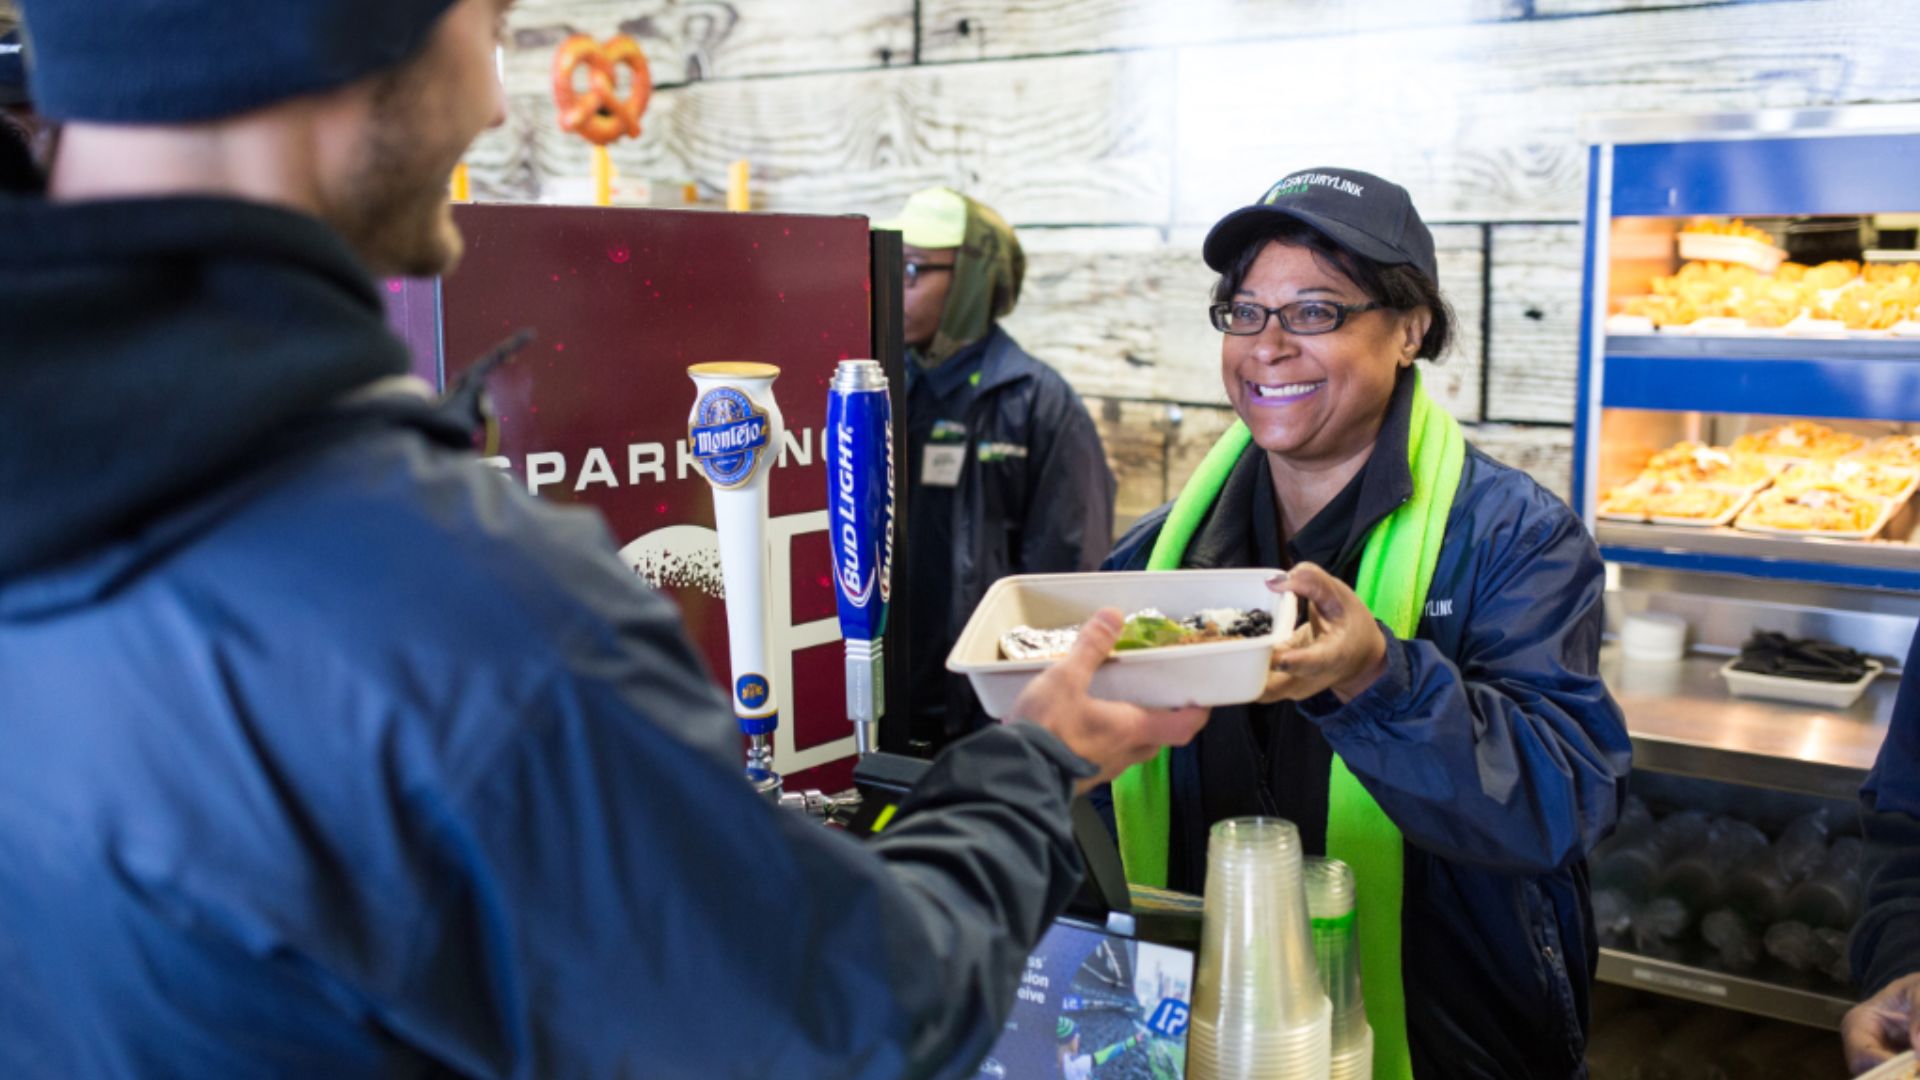 Both CenturyLink and the Seattle Seahawks recognize that older workers are among the best stadium employees. Sponsored by AARP.